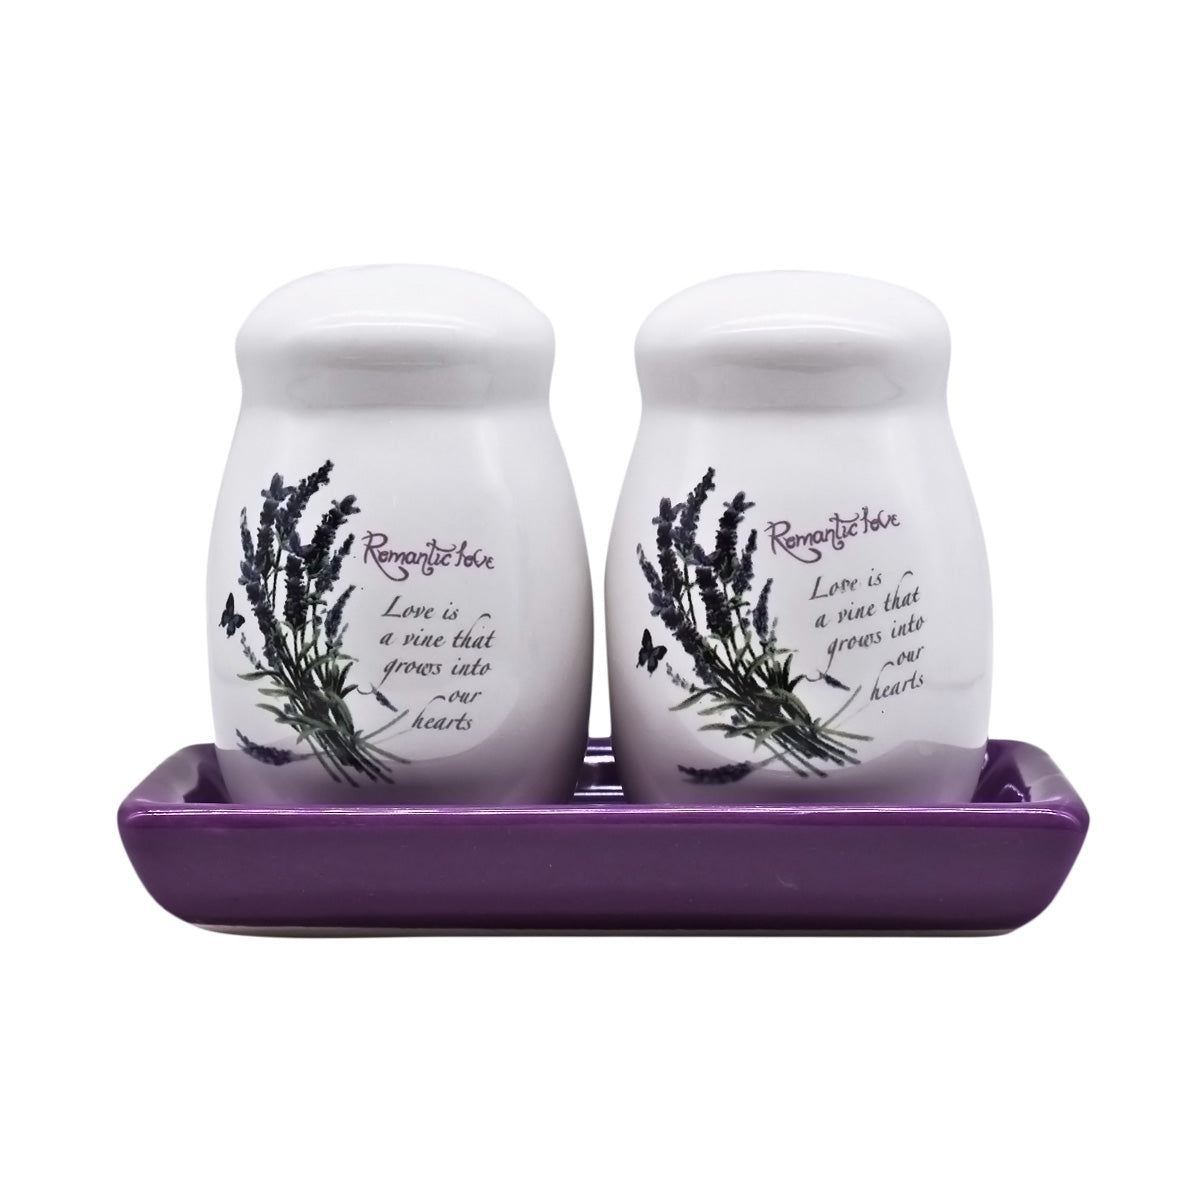 Ceramic Salt and Pepper Set with tray, Printed Design, White (8594)